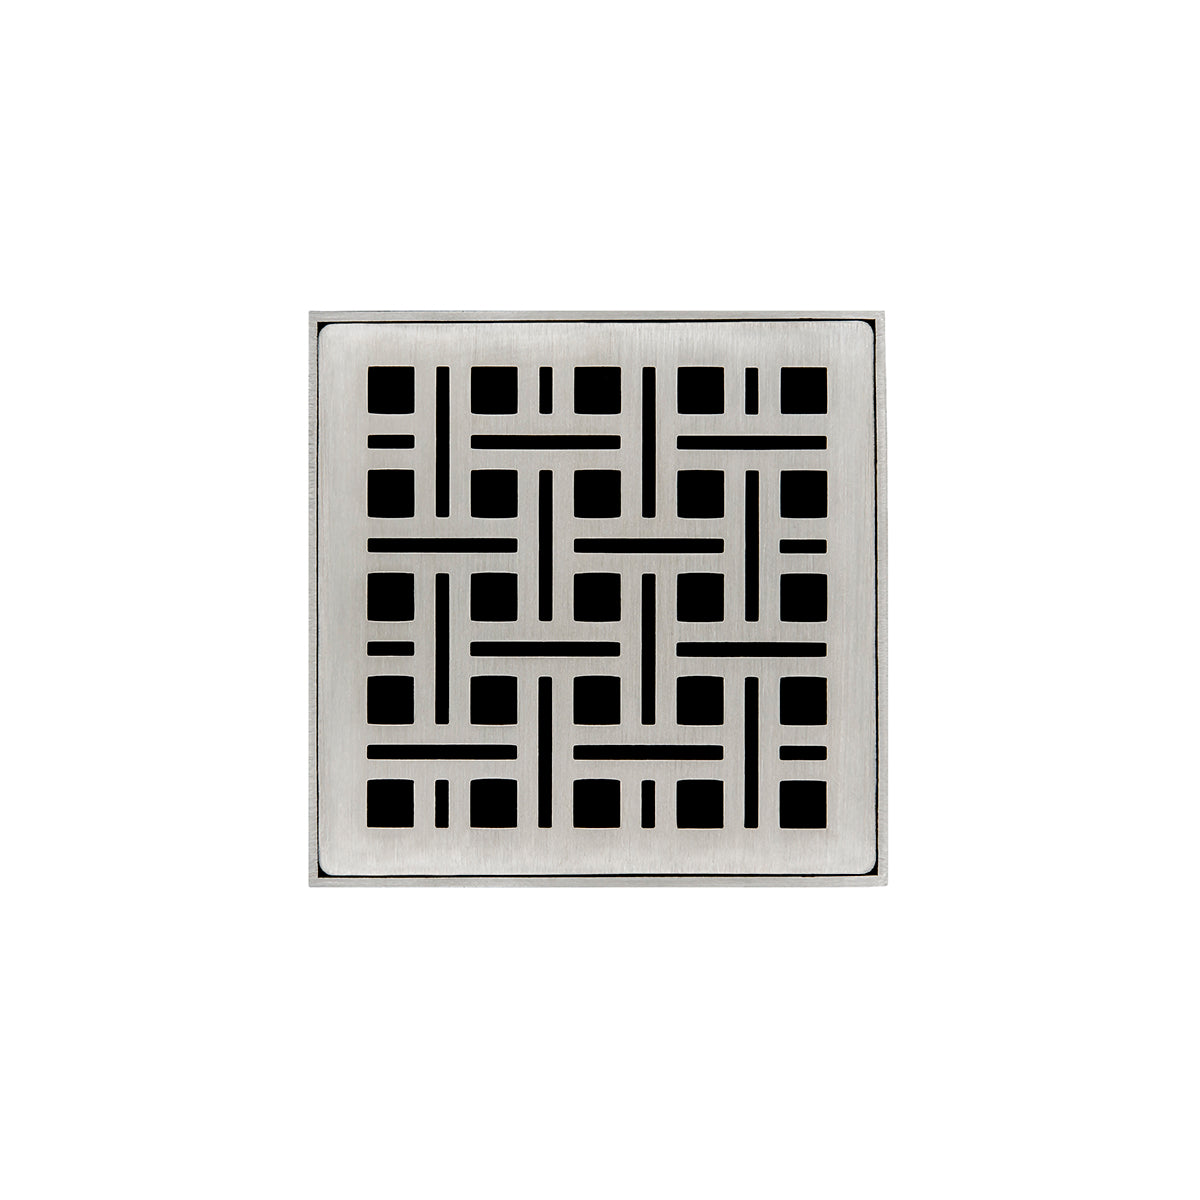 Infinity Drain 4" x 4" VDB 4 Premium Center Drain Kit with Weave Pattern Decorative Plate with ABS Bonded Flange Drain Body, 2", 3" and 4" Outlet